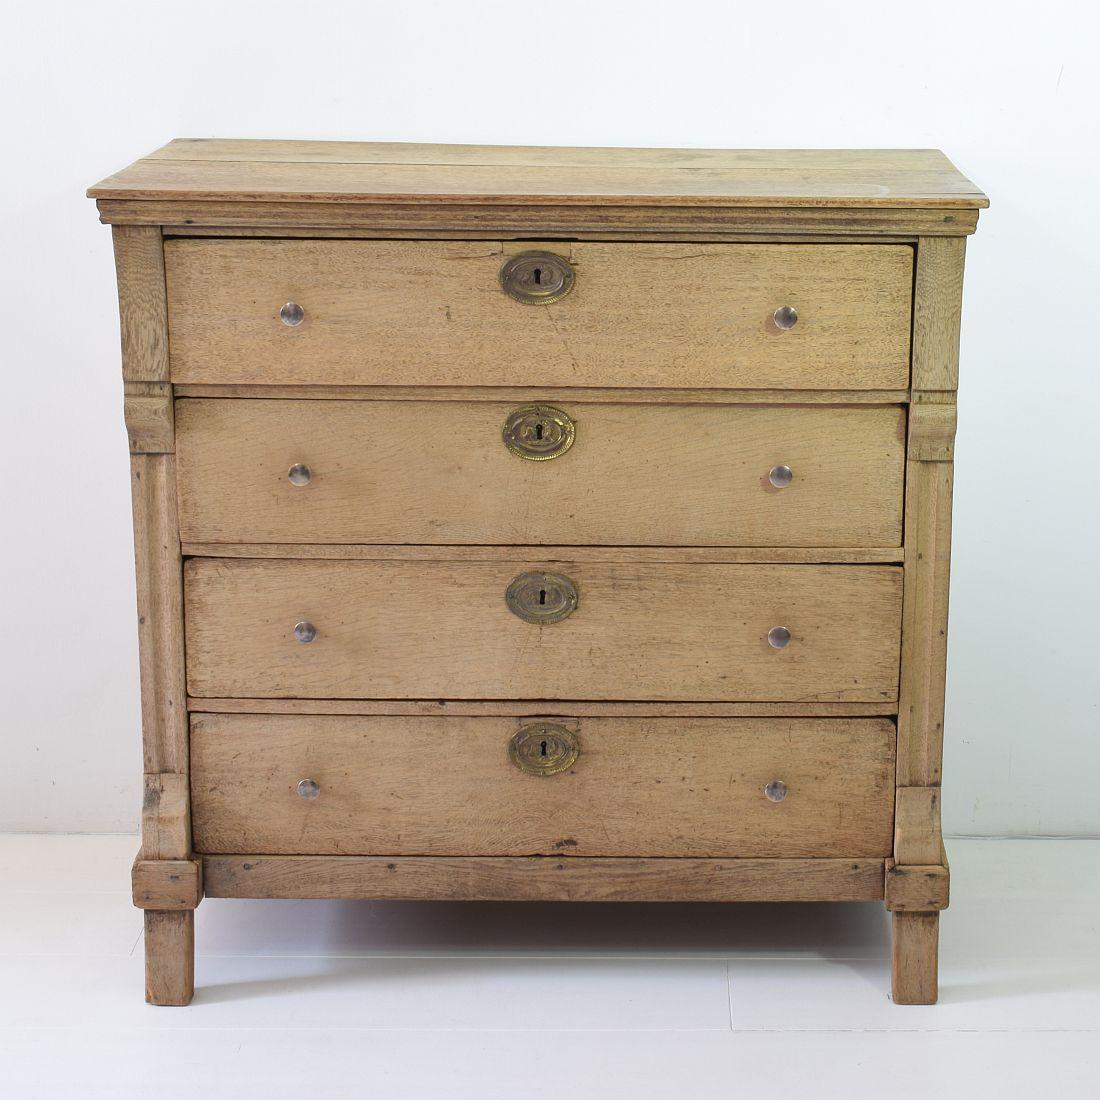 Nice robust oak Empire chest of drawers.
Holland, circa 1800-1830. Weathered, small losses and old repairs
This piece of furniture is beautiful weathered and these imperfections only add to its charm.
